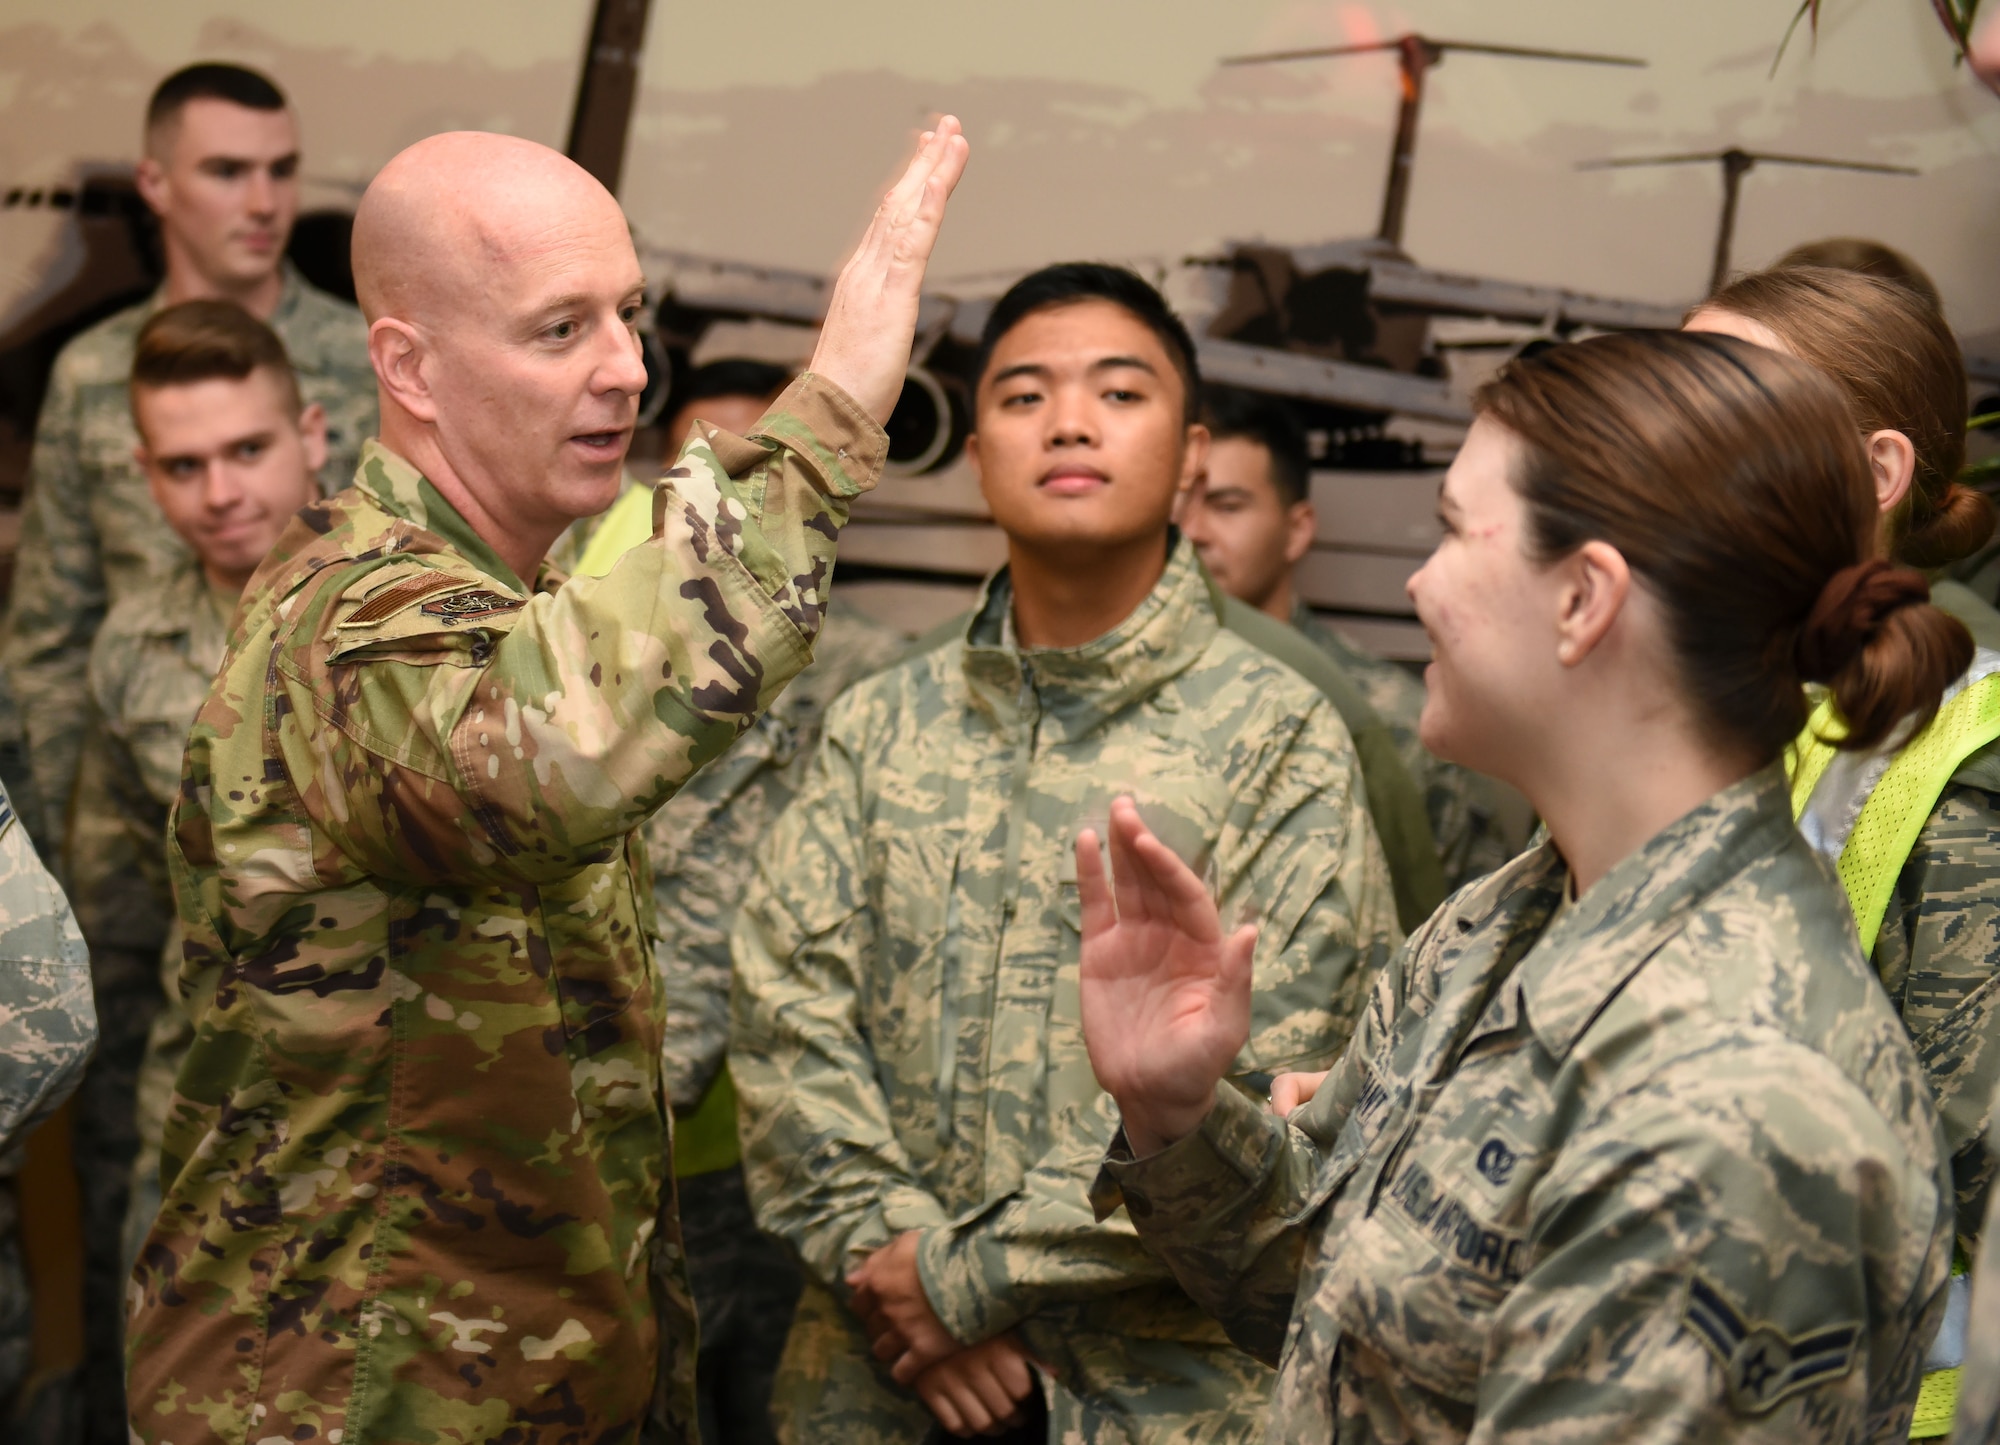 U.S. Air Force Chief Master Sgt. Chris Simpson, 18th Air Force command chief, greets dorm residents during a visit to Travis Air Force Base, California, March 6, 2019. Simpson, along with U.S. Air Force Maj. Gen. Sam Barrett 18th AF commander, toured the base March 4 to 8 as part of a scheduled visit. (U.S. Air Force photo by Airman 1st Class Christian Conrad)